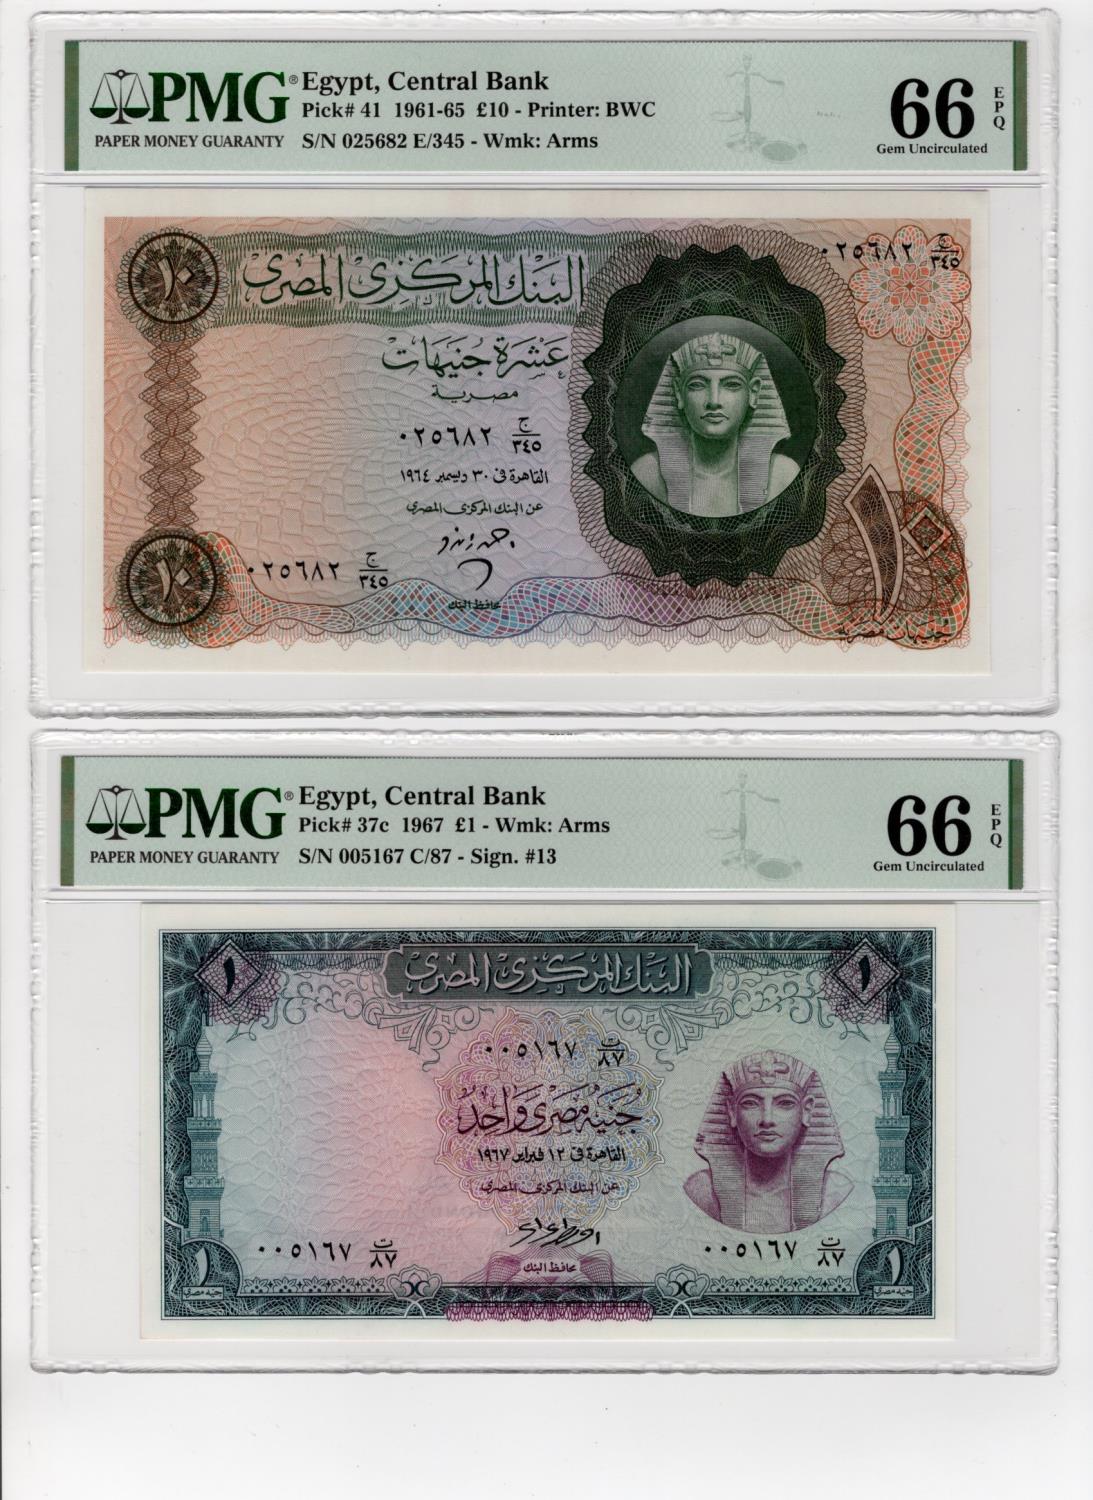 Egypt (2), 10 Pounds dated 1964 signed Zendo, serial 025682 E/345 (BNB B307b, Pick41), 1 Pound dated